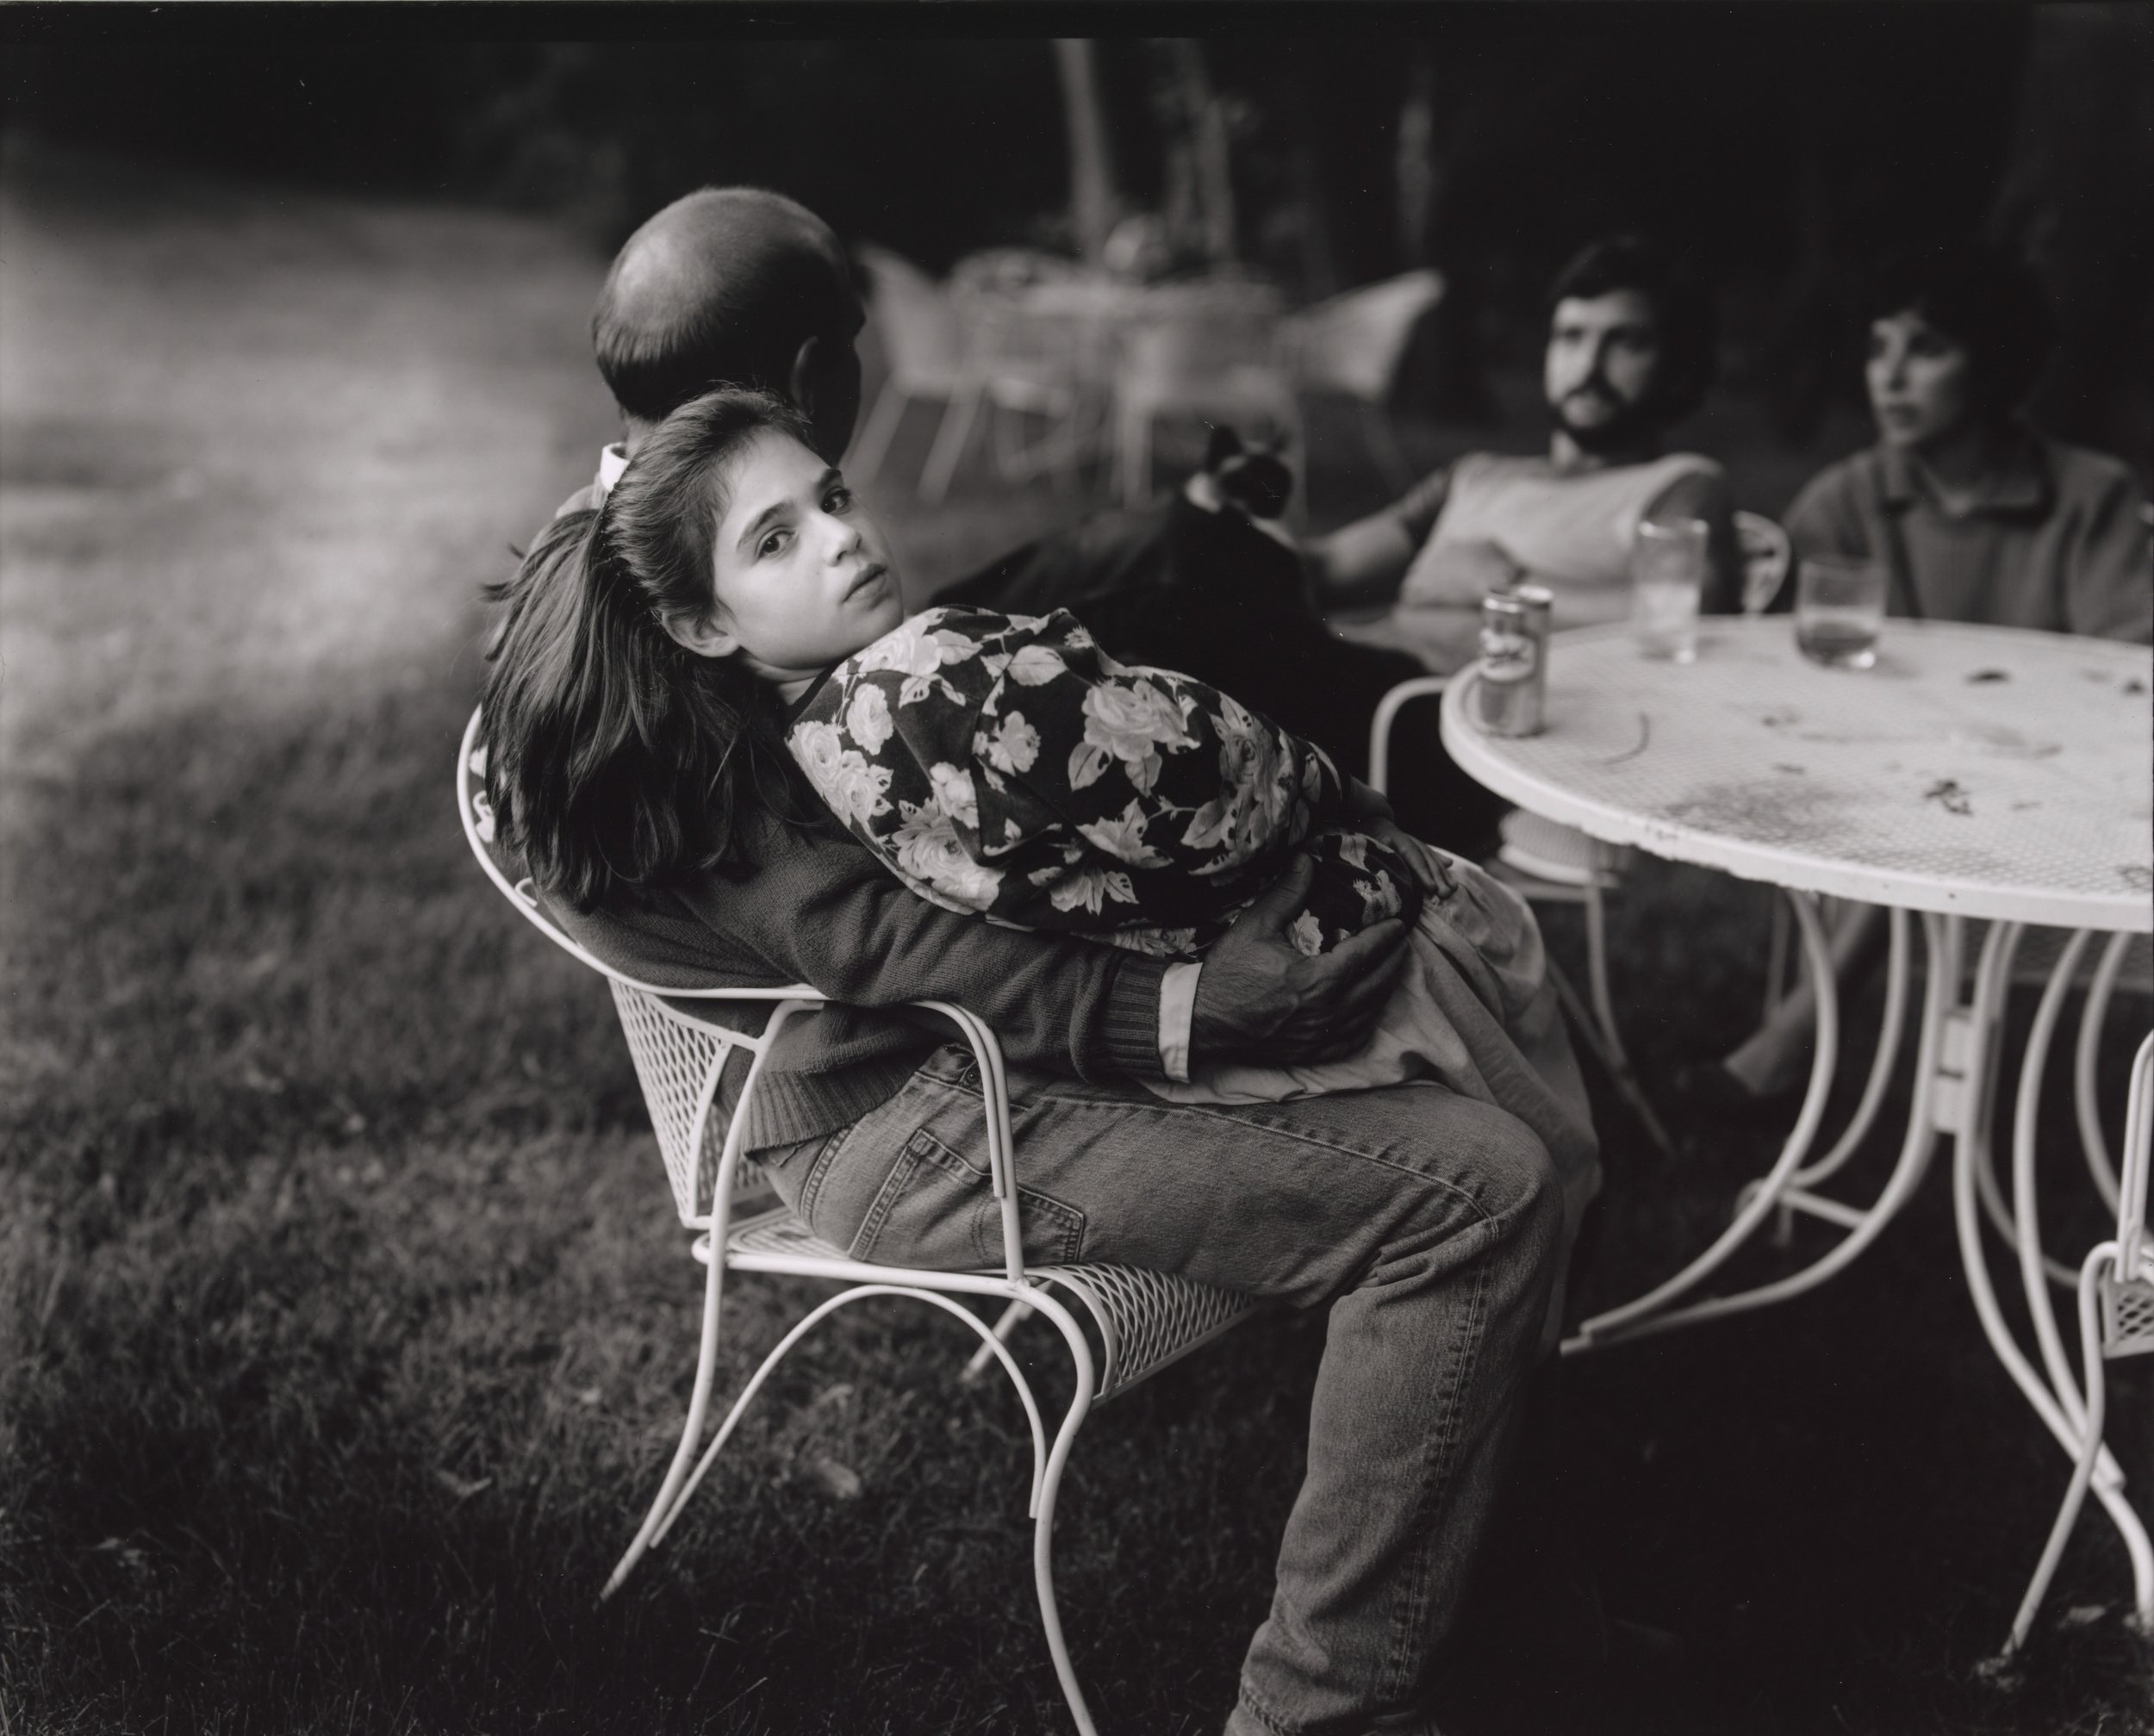  Sally Mann, (United States, born 1951),  Leah and her Father  from the series  At Twelve , 1983-1985, gelatin silver print, 10 3/8 x 13 inches. Portland Museum of Art, Maine. Promised Gift from the Judy Glickman Lauder Collection. 7.1998.39 Image Co